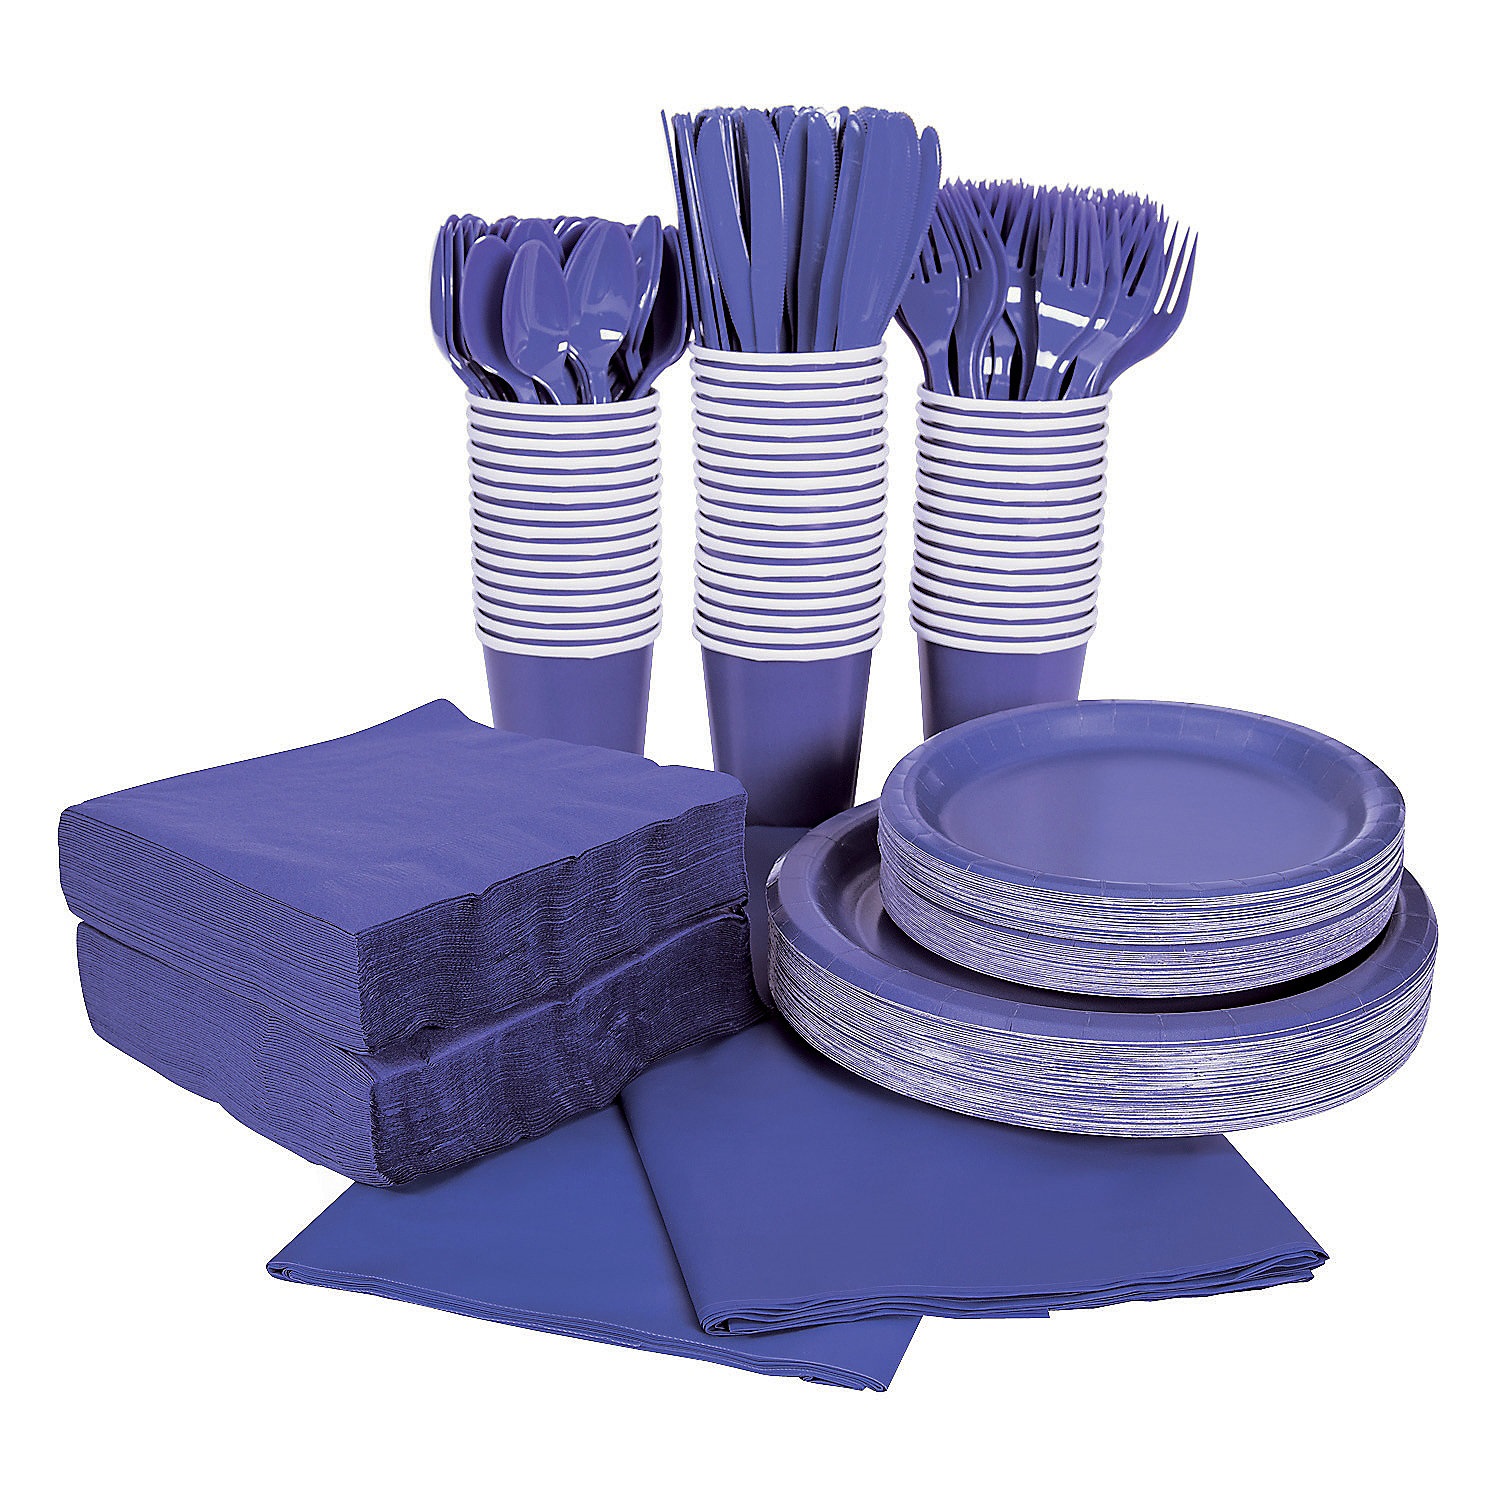 purple-tableware-kit-for-48-guests_13805814